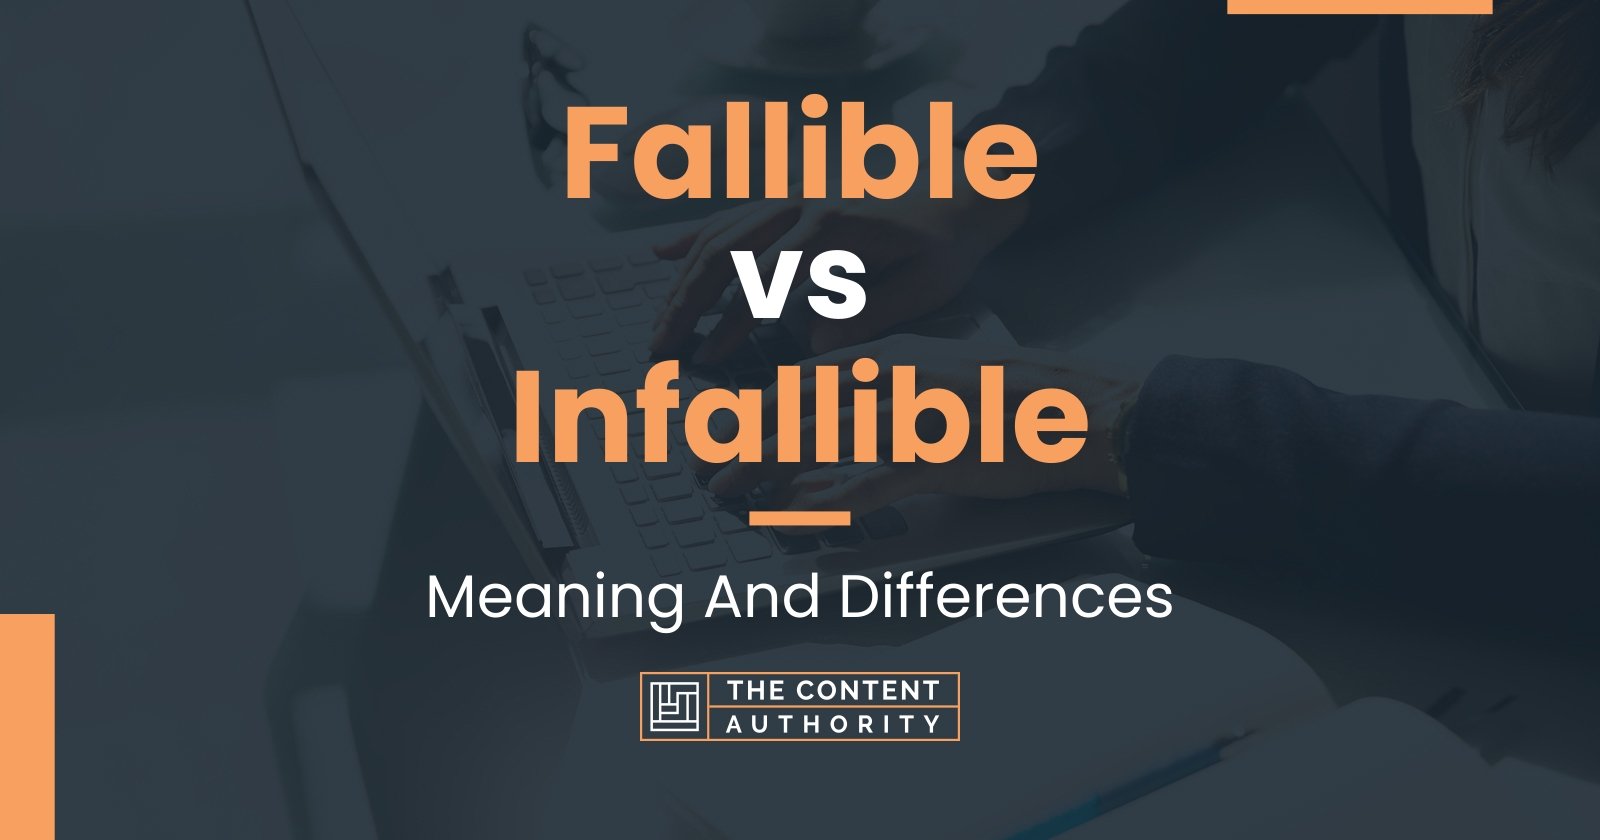 Fallible vs Infallible: Meaning And Differences